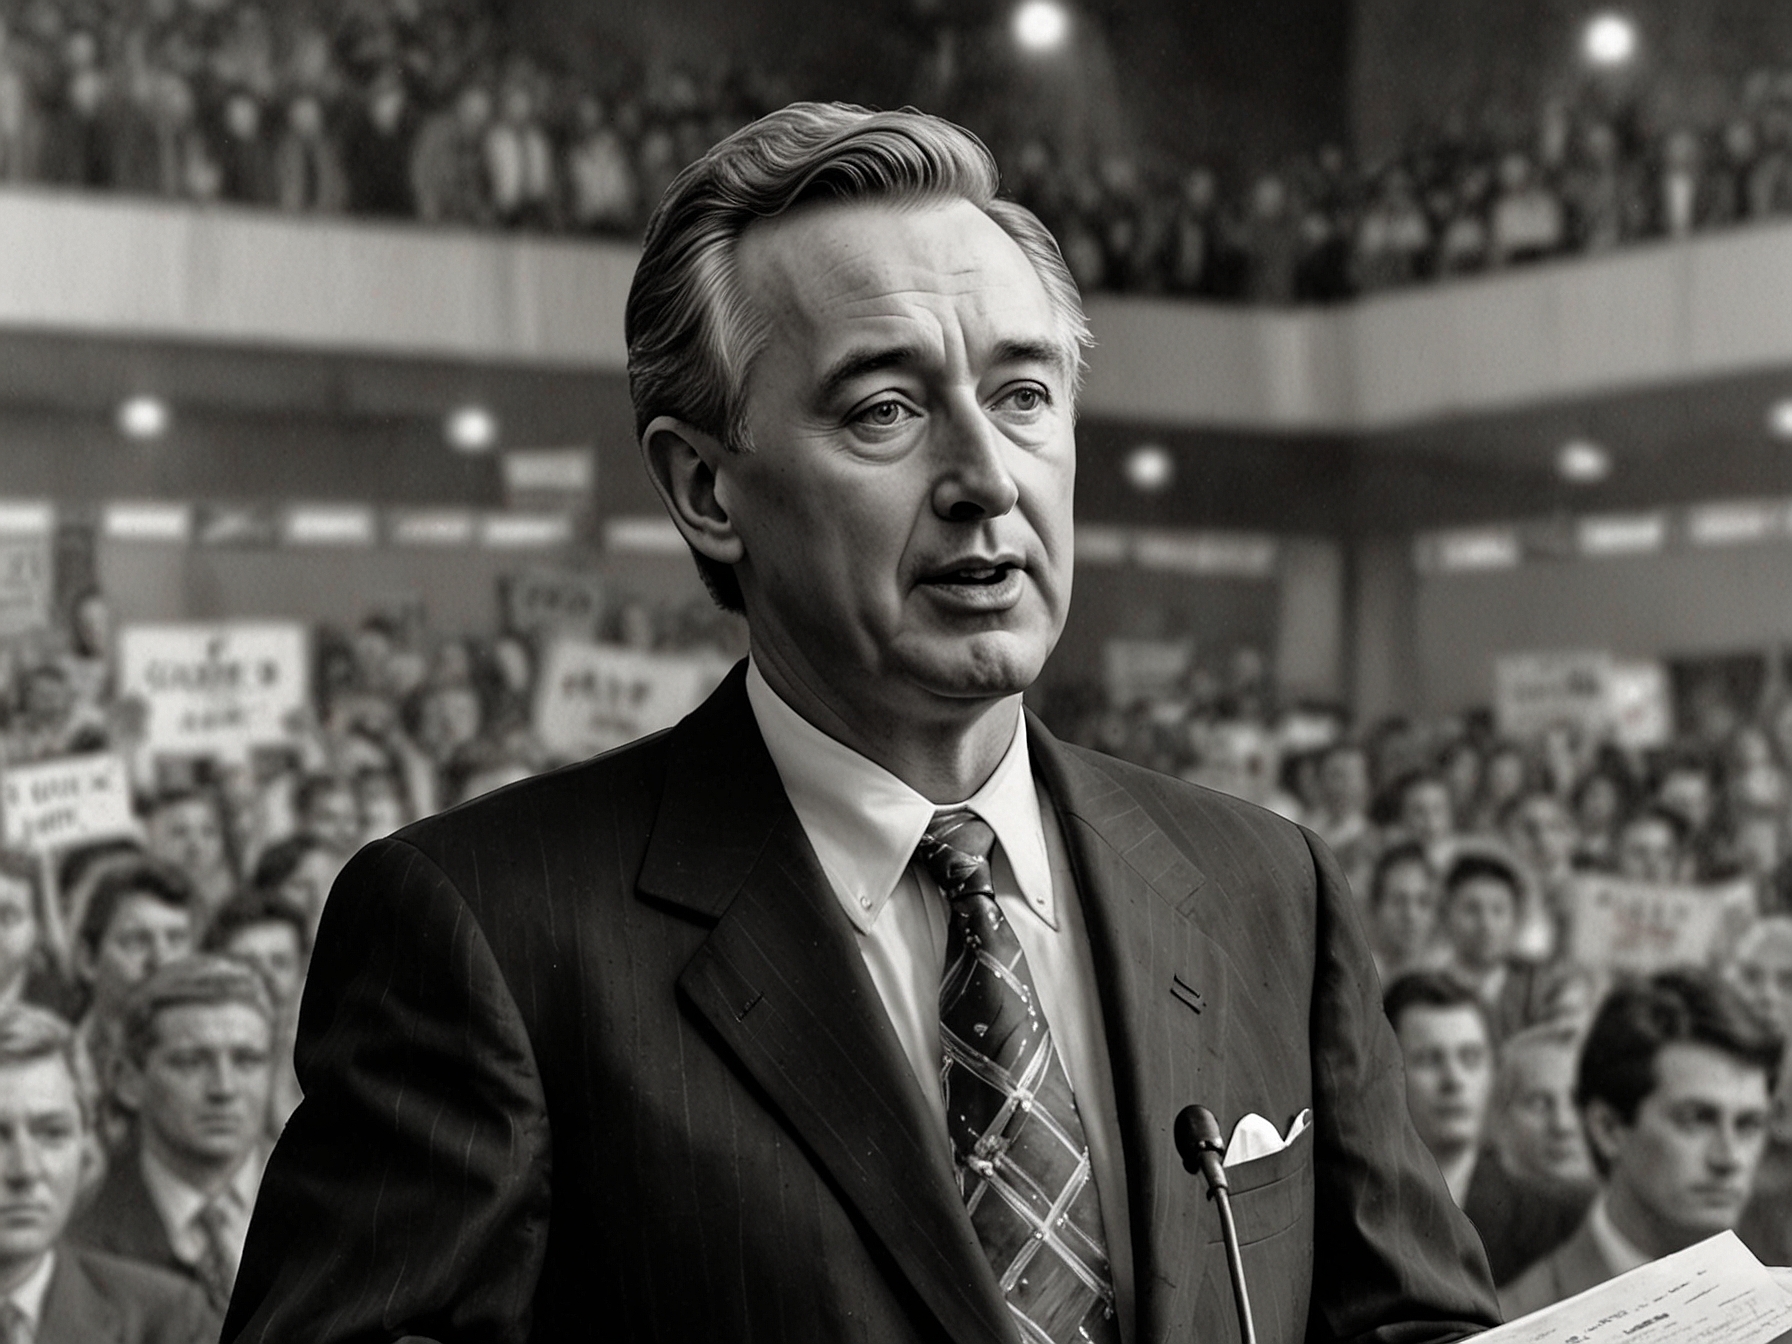 A historical image of Preston Manning addressing a crowd in Canada during the 1993 campaign, emphasizing his role in the Progressive Conservative Party's downfall.